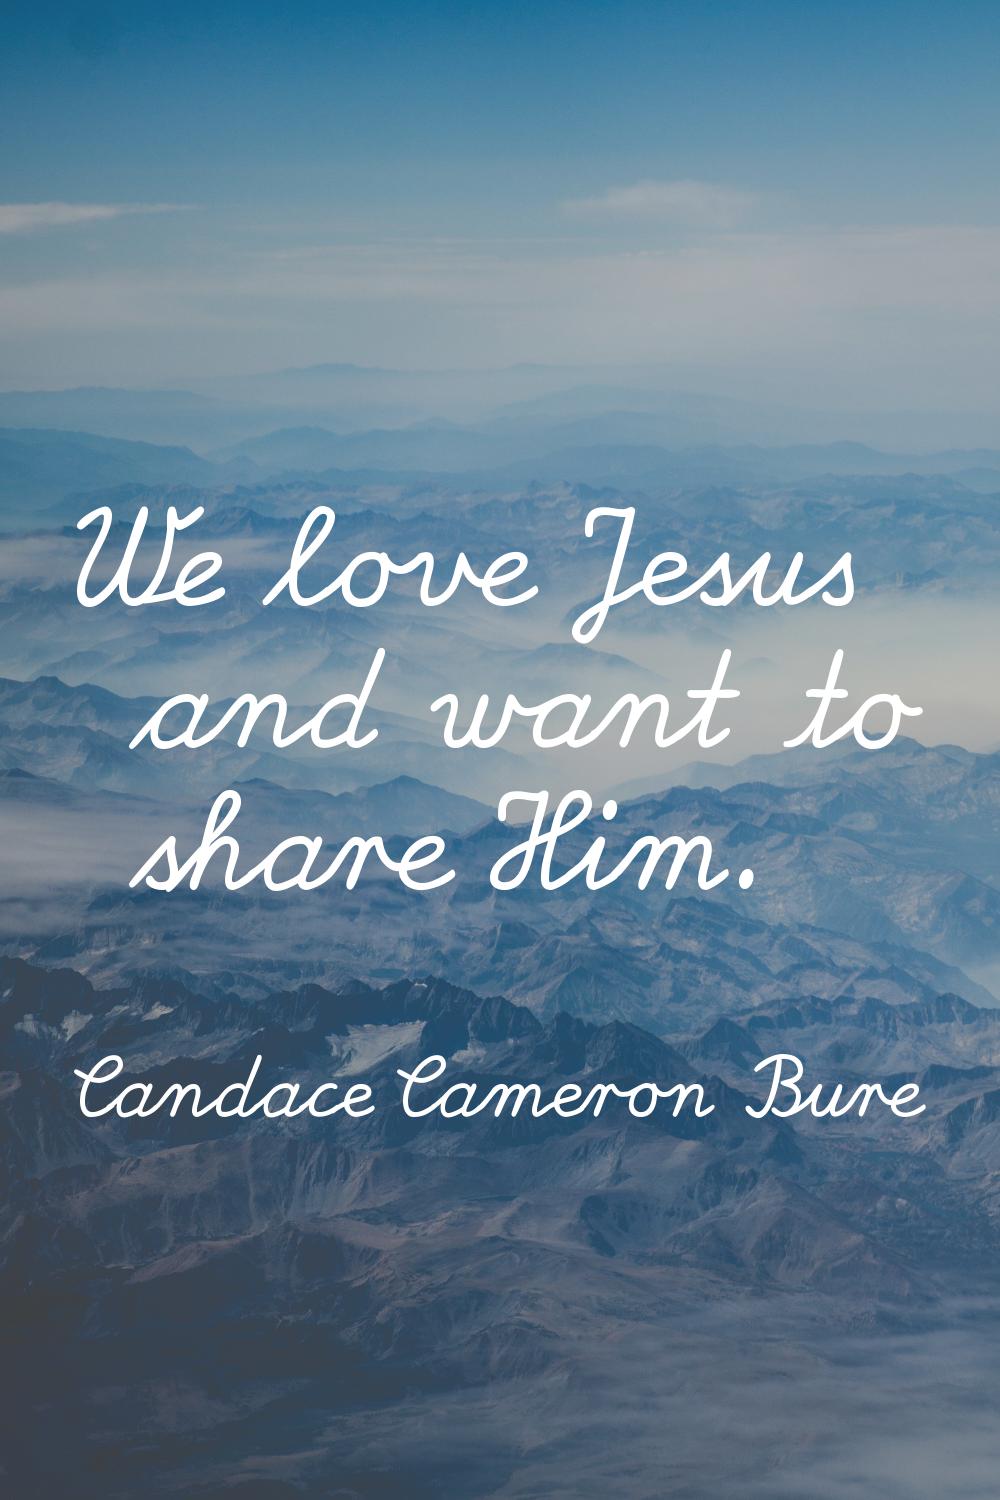 We love Jesus and want to share Him.